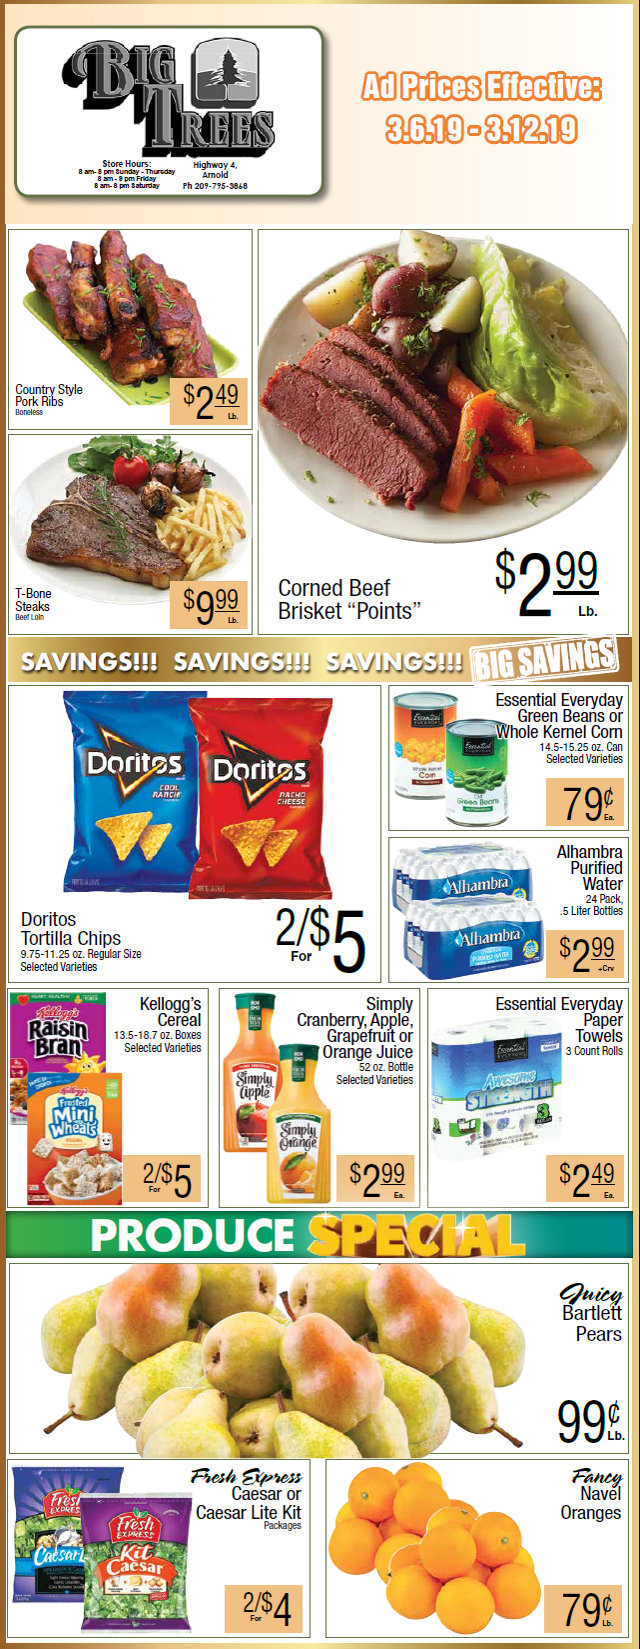 Big Trees Market Weekly Ad & Grocery Specials Through March 12th